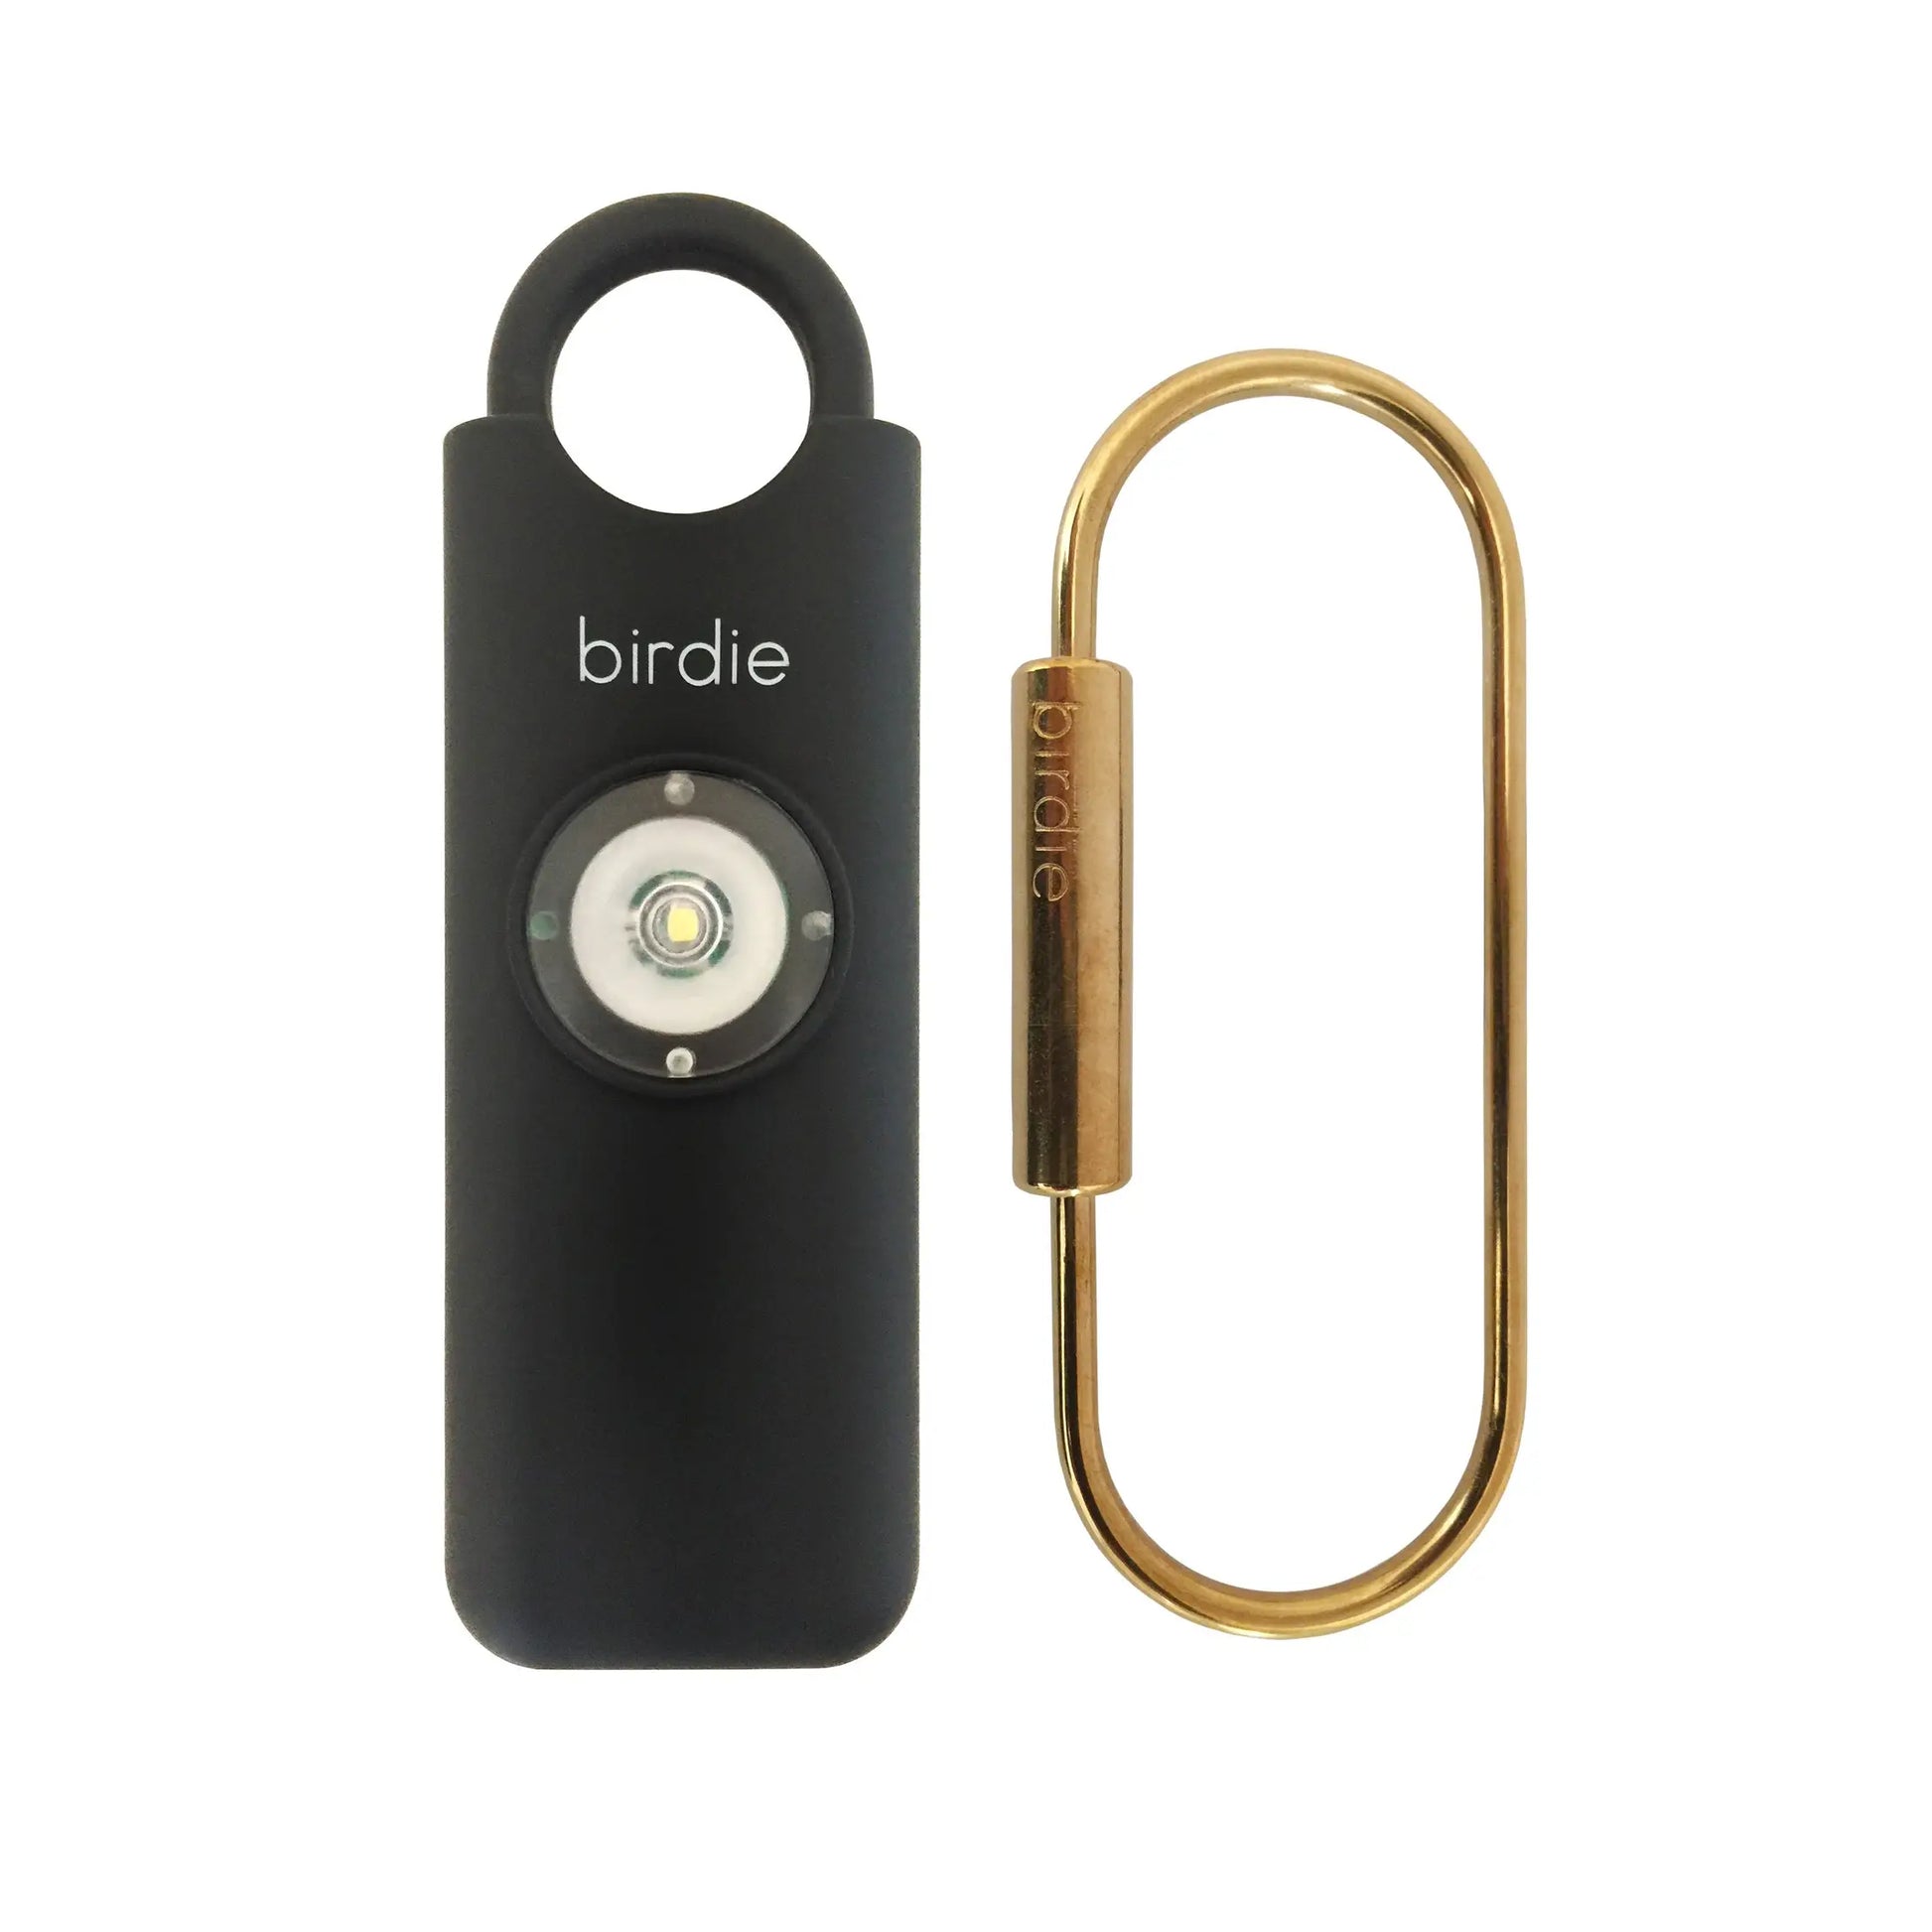 She's Birdie Personal Safety Alarm - Charcoal